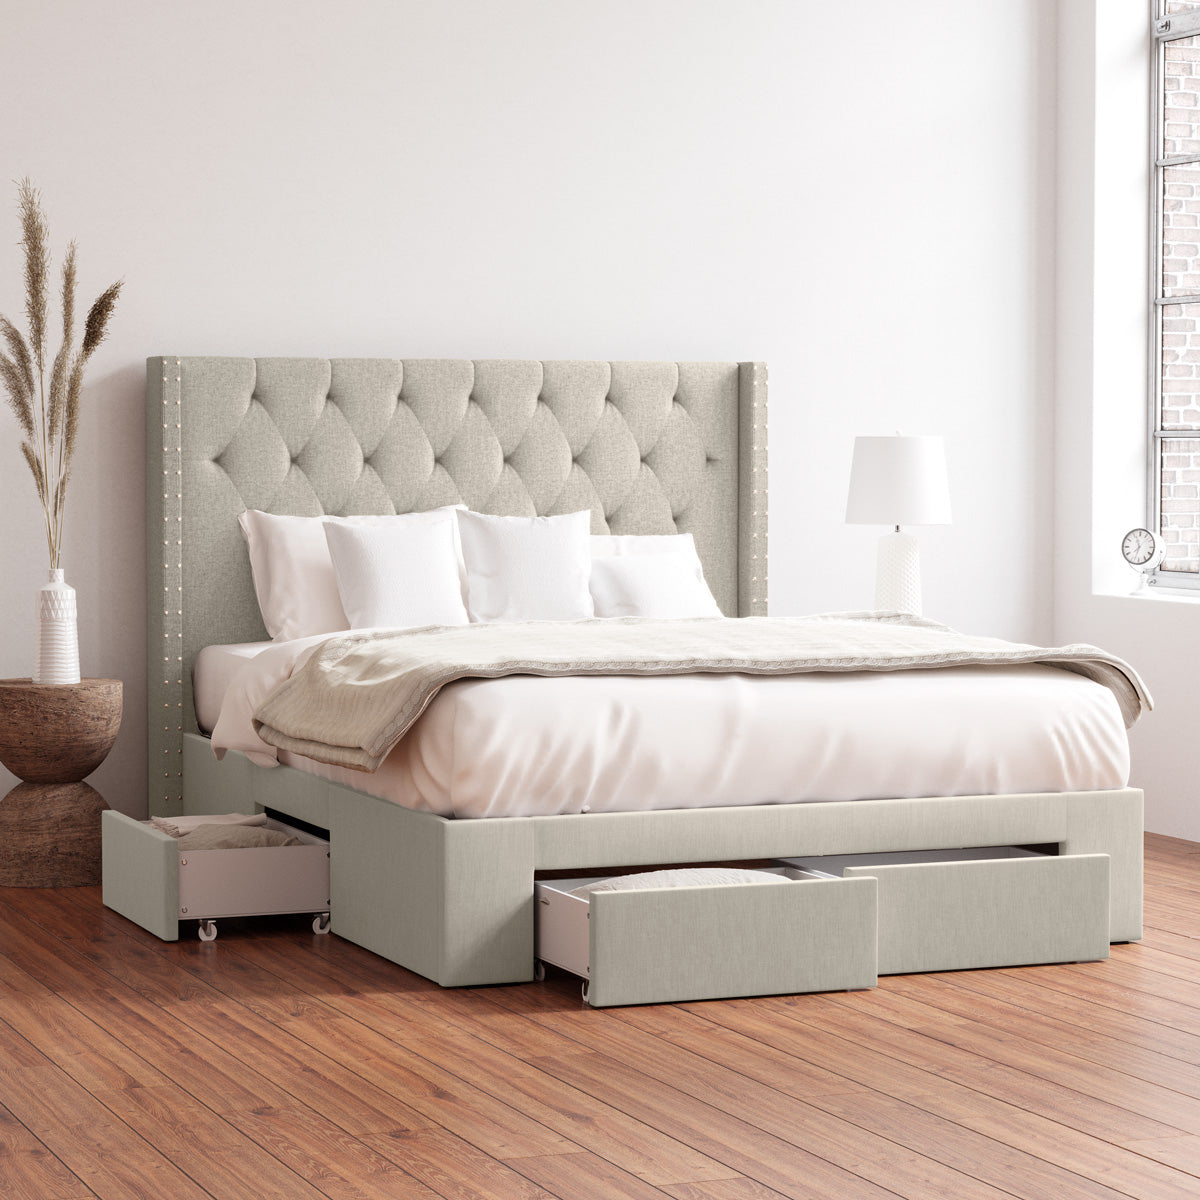 Leonora Wing Bed Frame with Four Storage Drawers (Natural Beige Fabric)